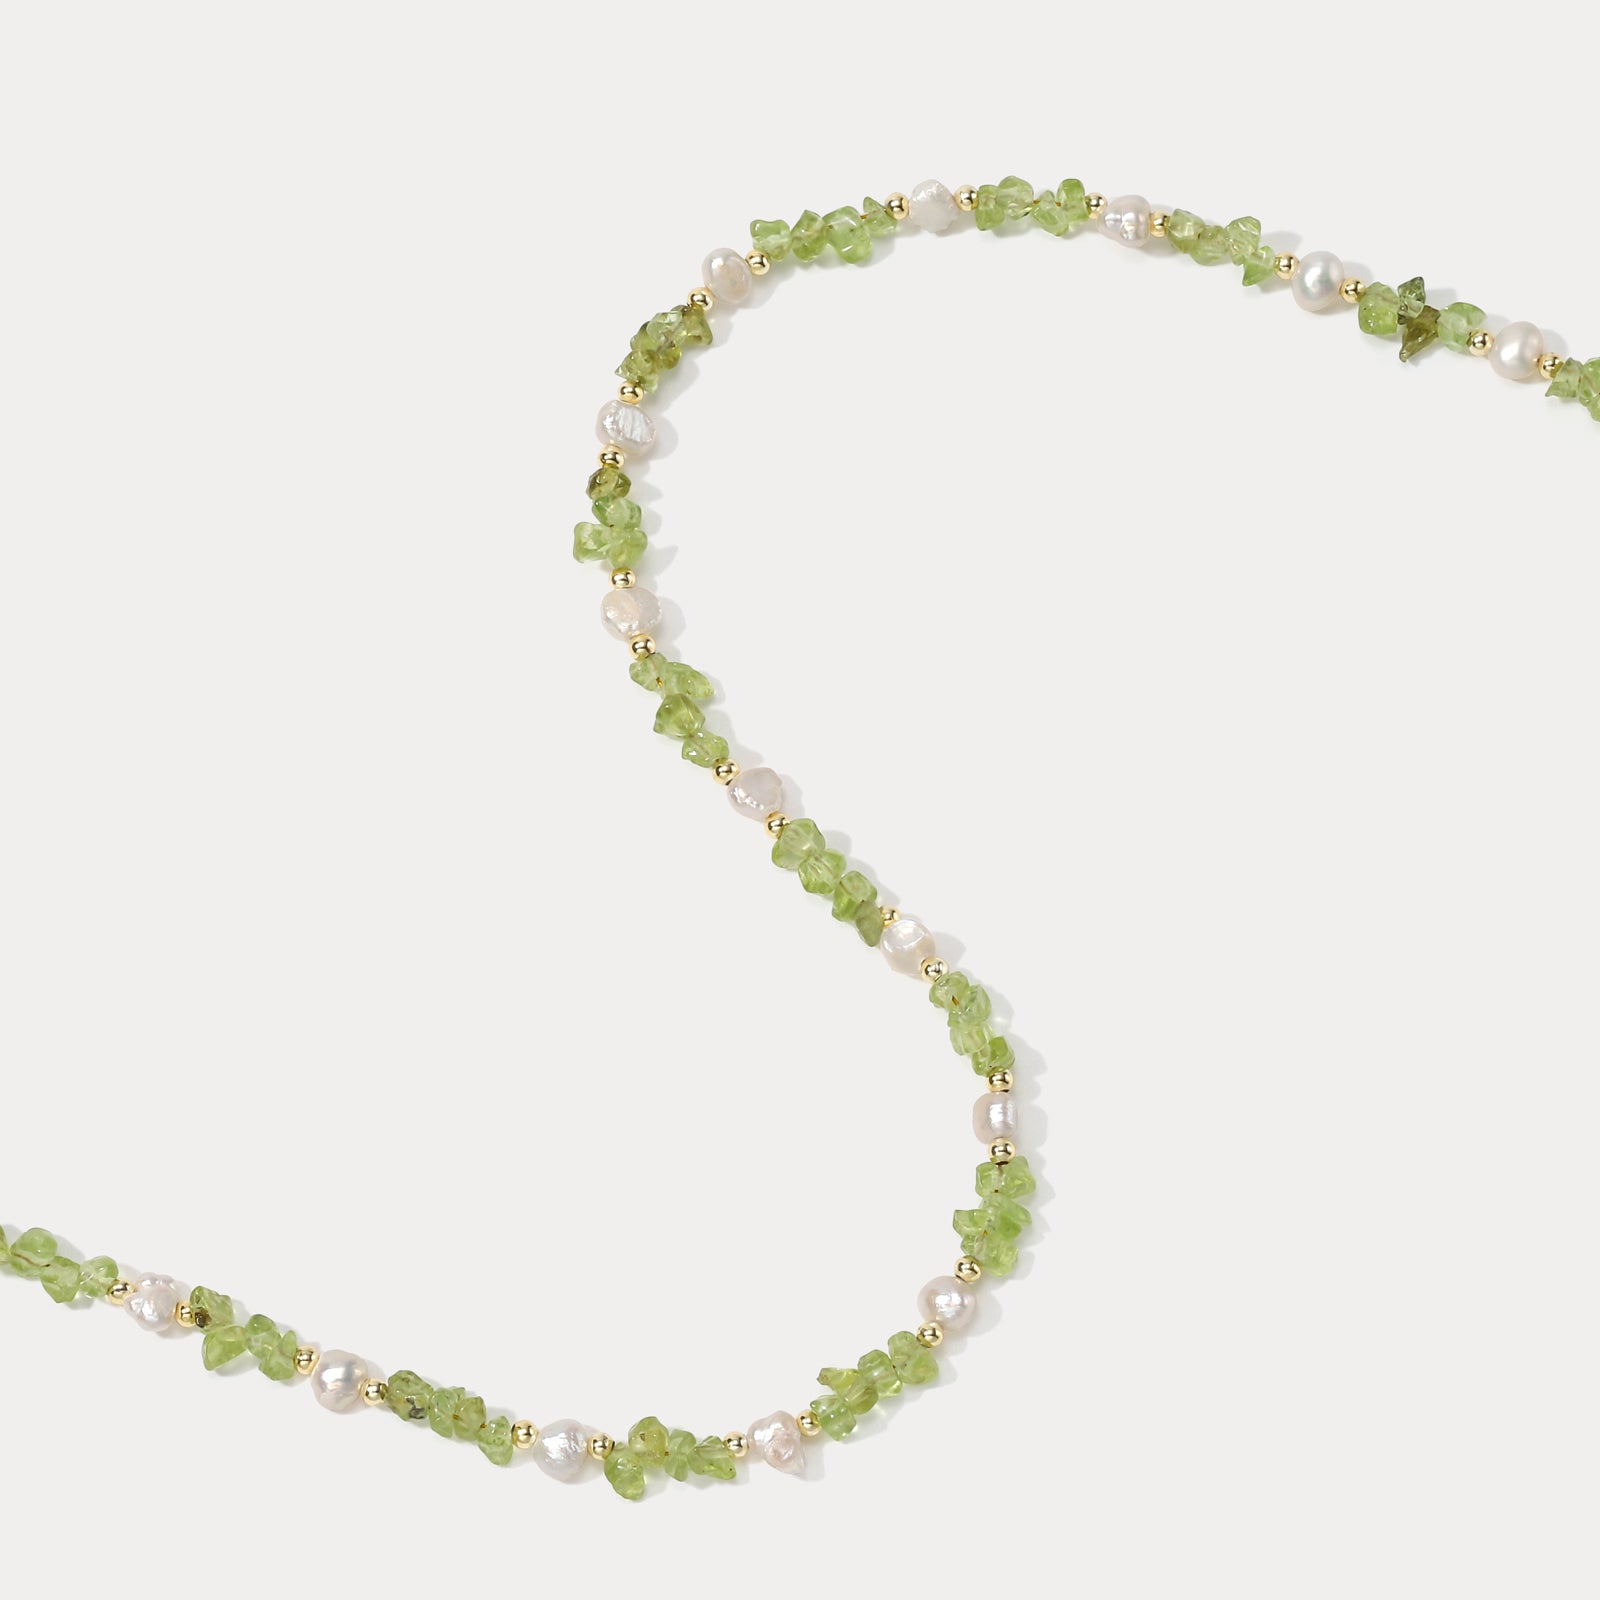 Pastel Green Chip Stone Beaded Necklace